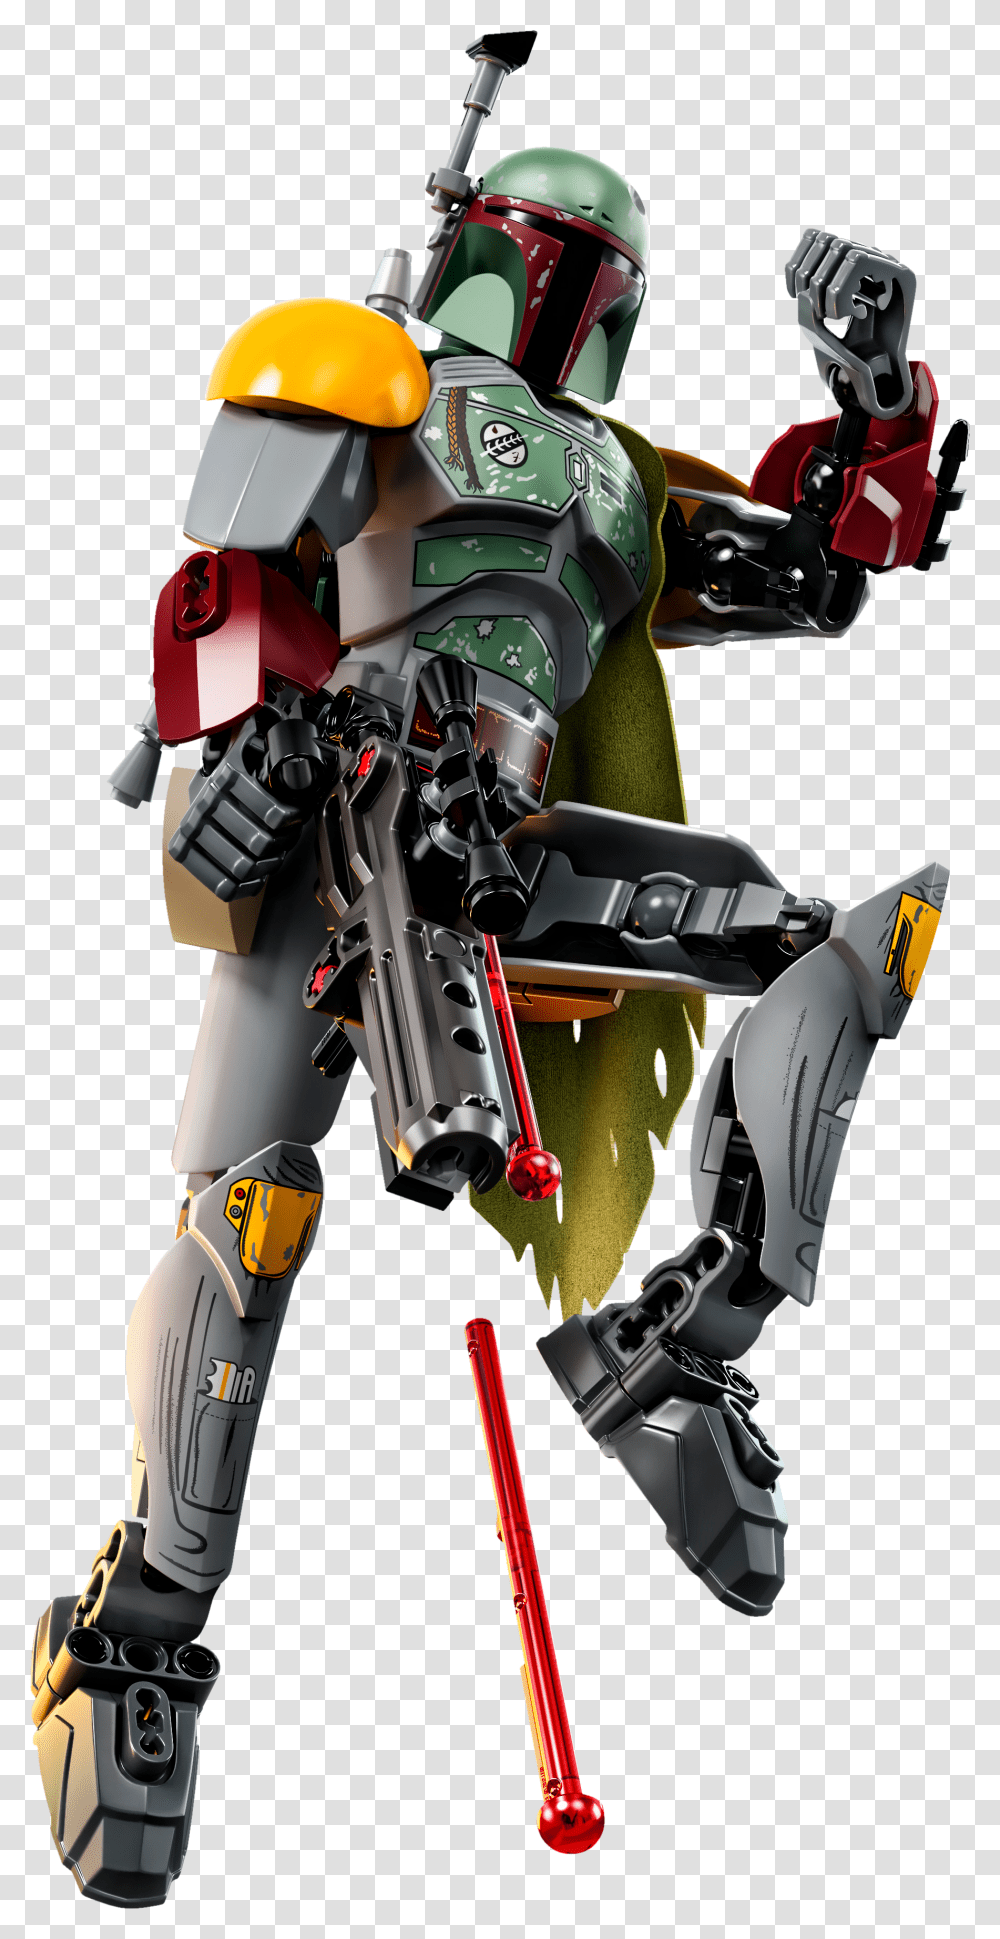 Constraction Star Wars Boba Fett Lego, Toy, Robot, Costume, Armor Transparent Png